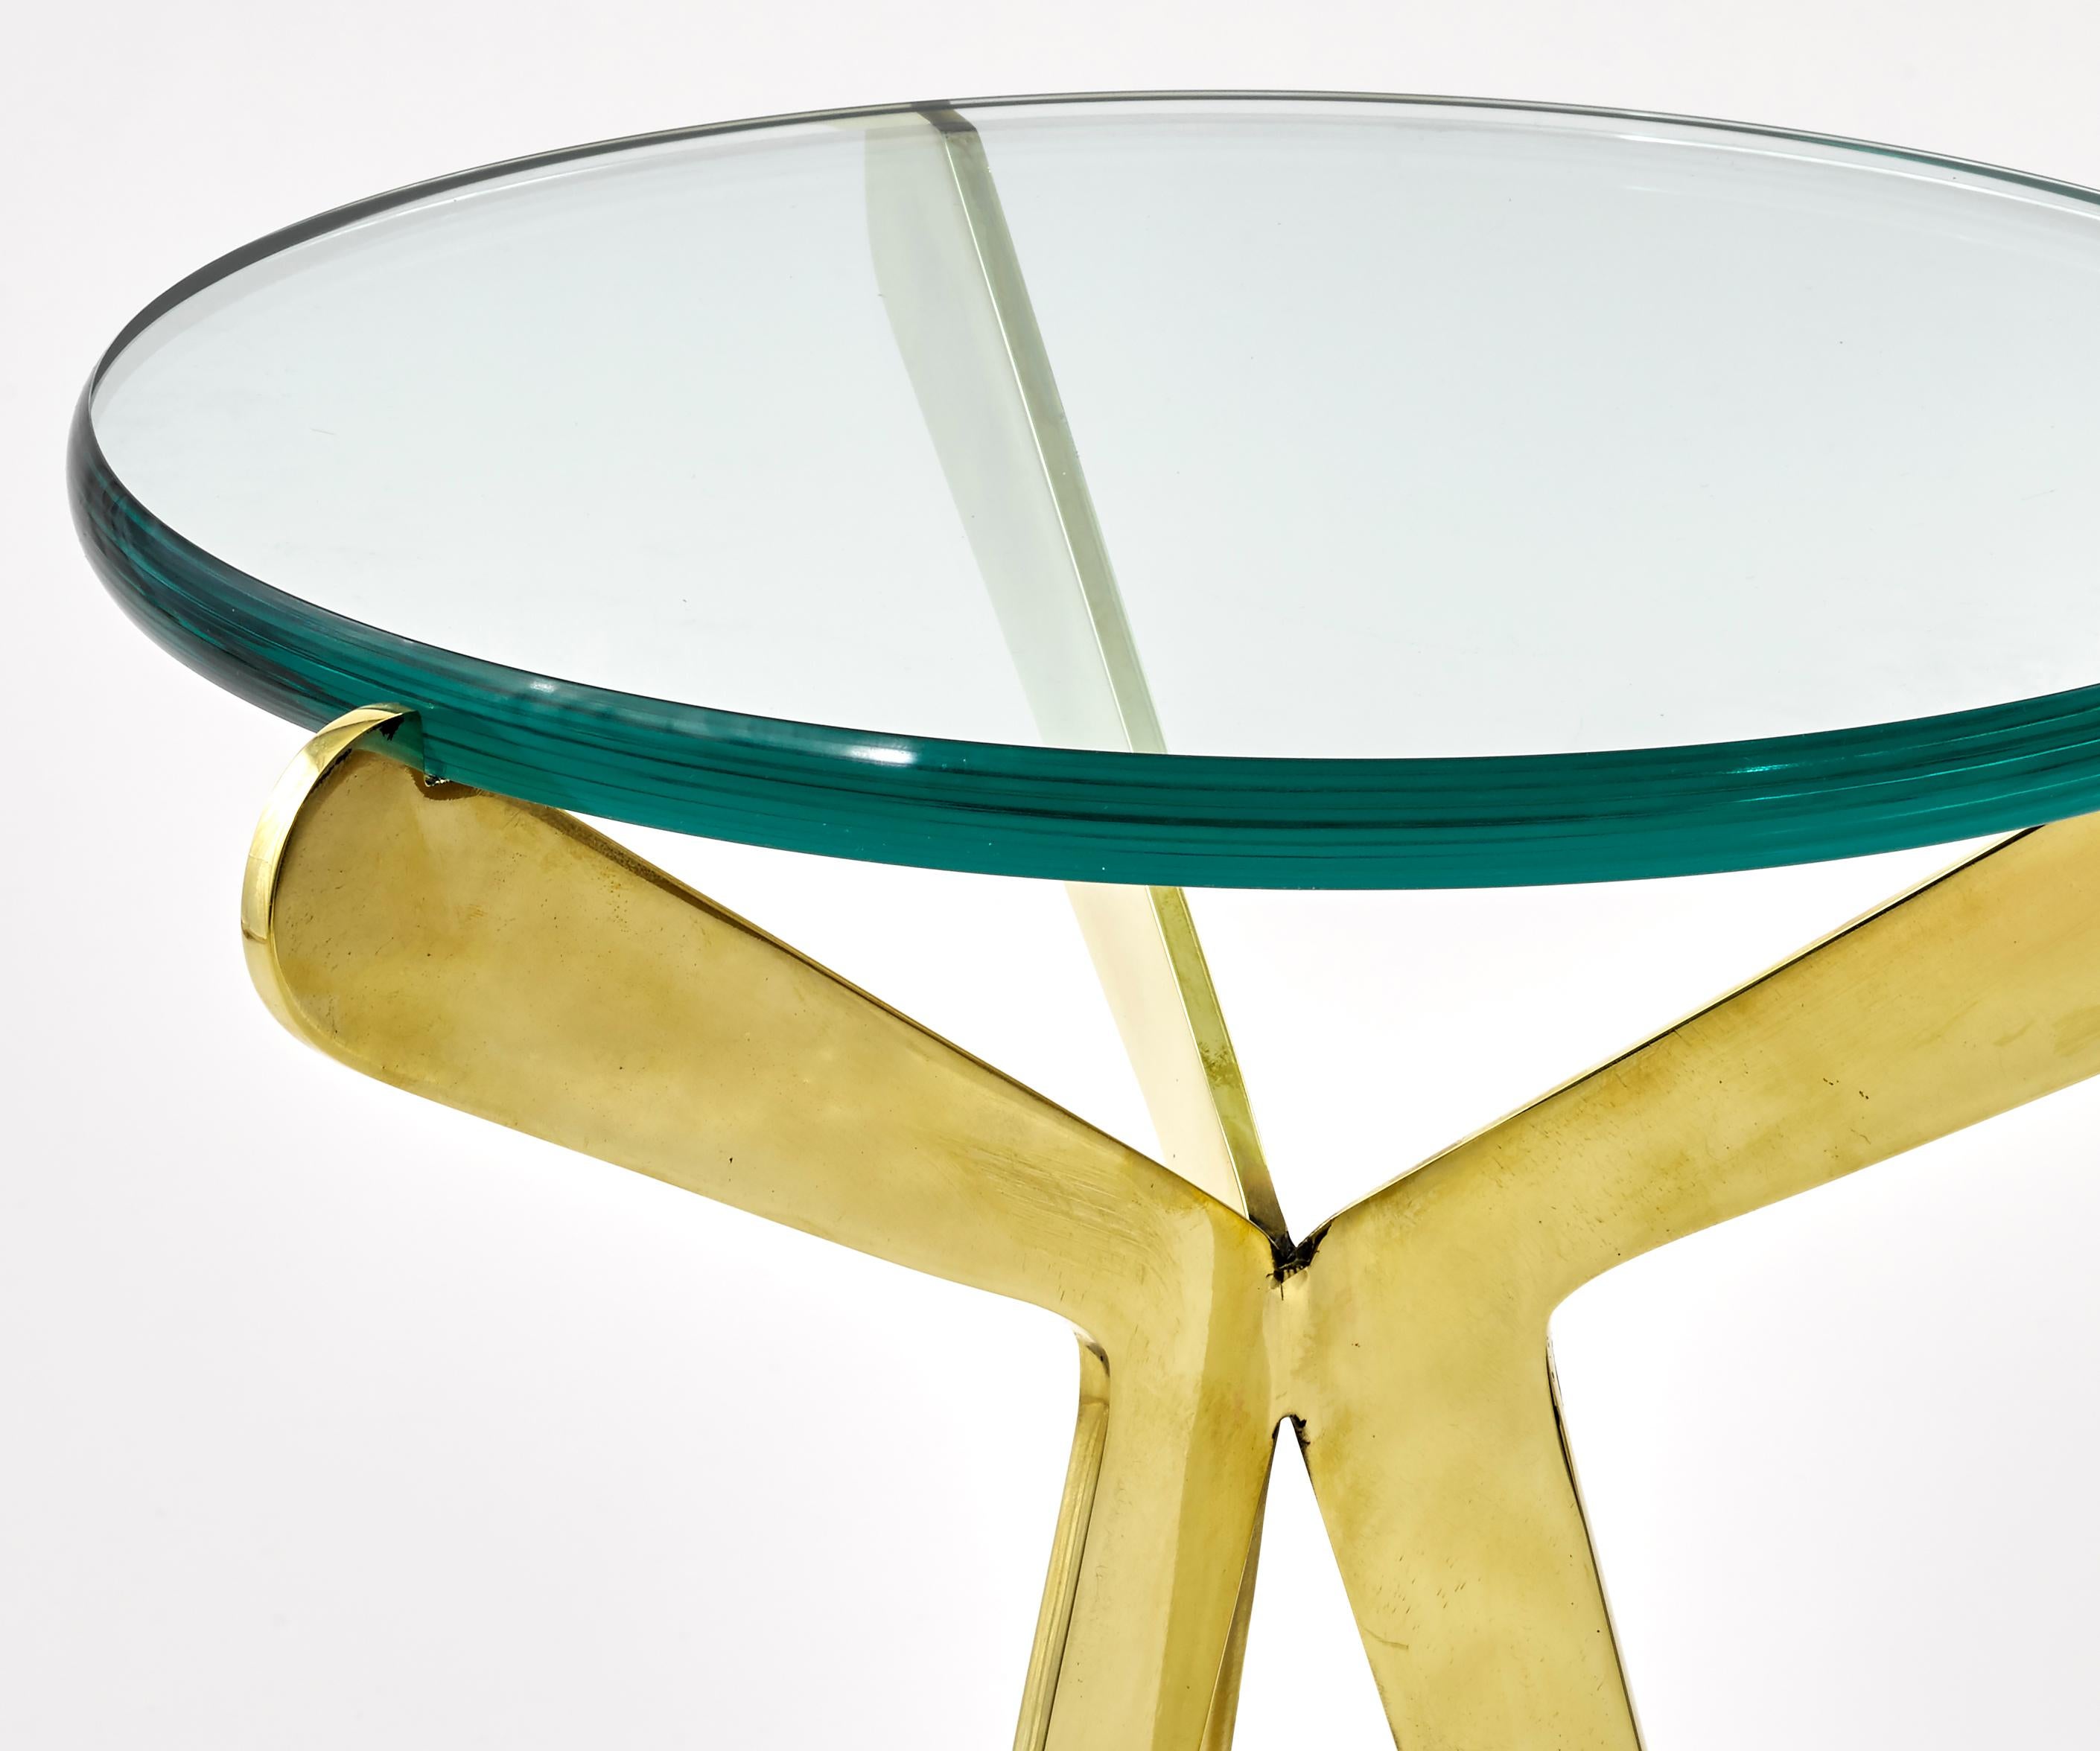 The Fiore table features three brass legs coming together at a central weld and then sprouting to hold a thick glass top. Shown in polished brass.

Customization Options:

Each piece is hand crafted in Italy and is available in any of our 10